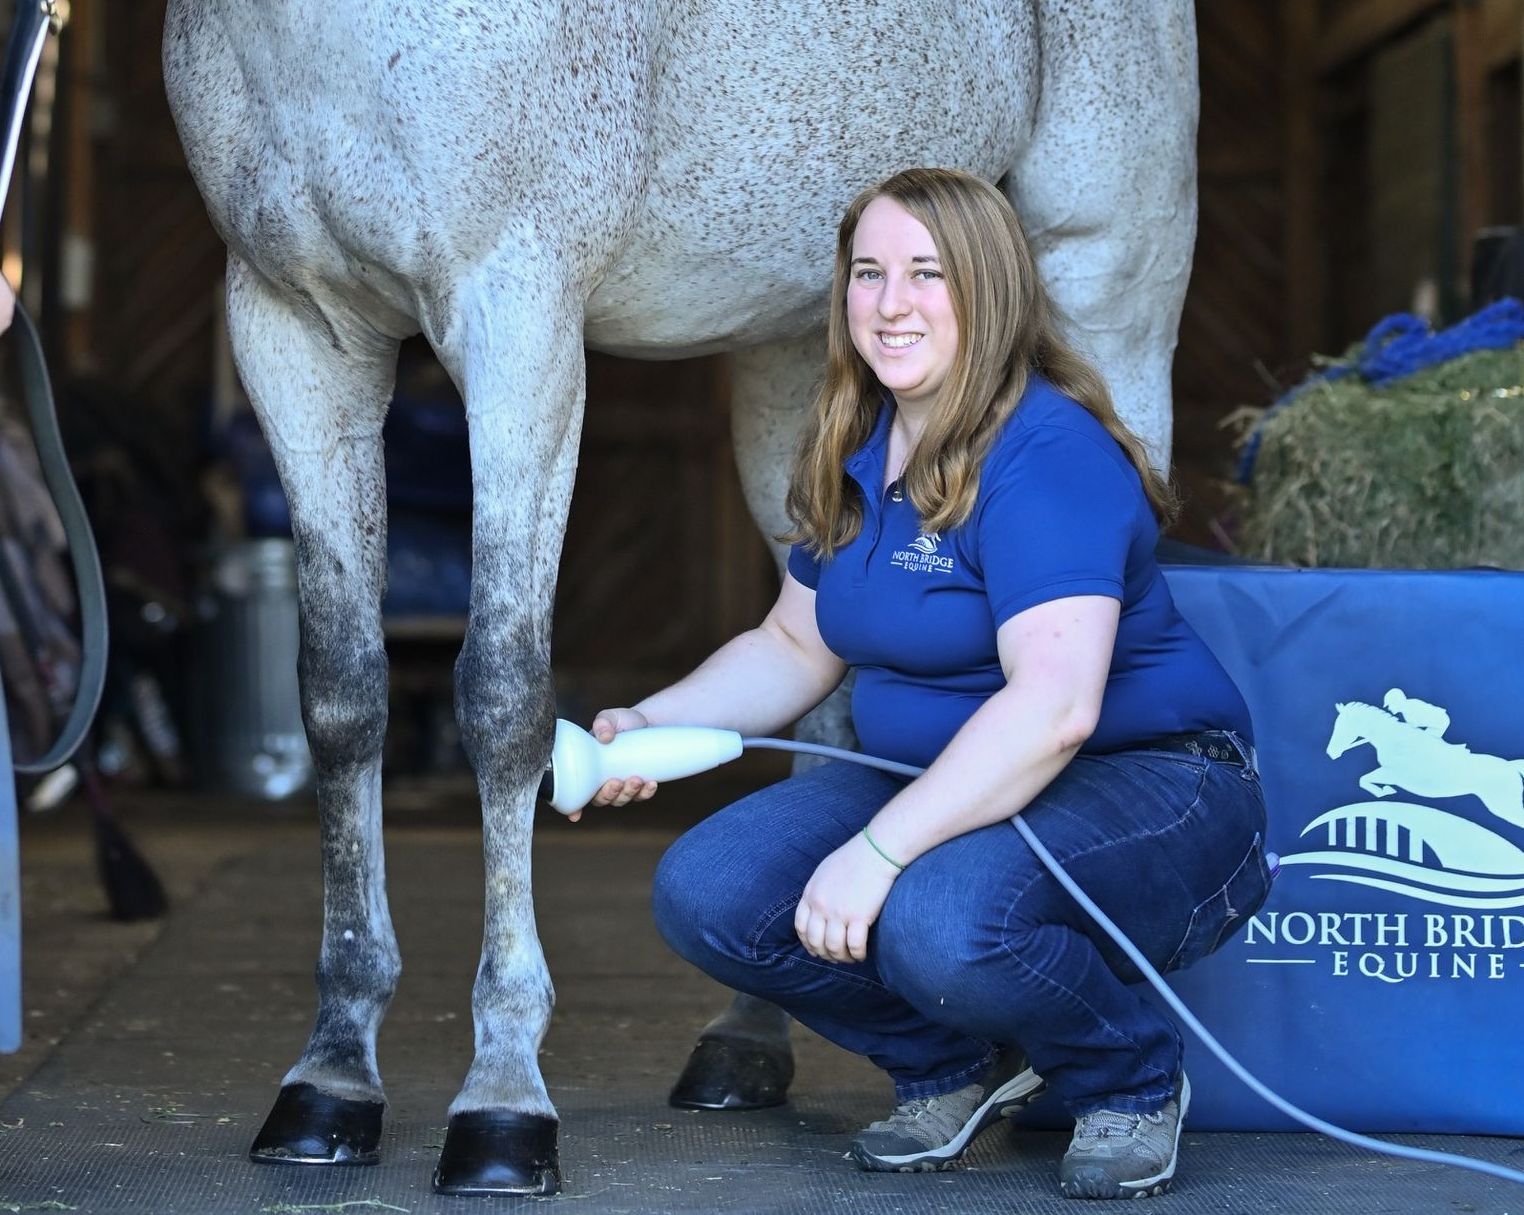 Equine shockwave therapy